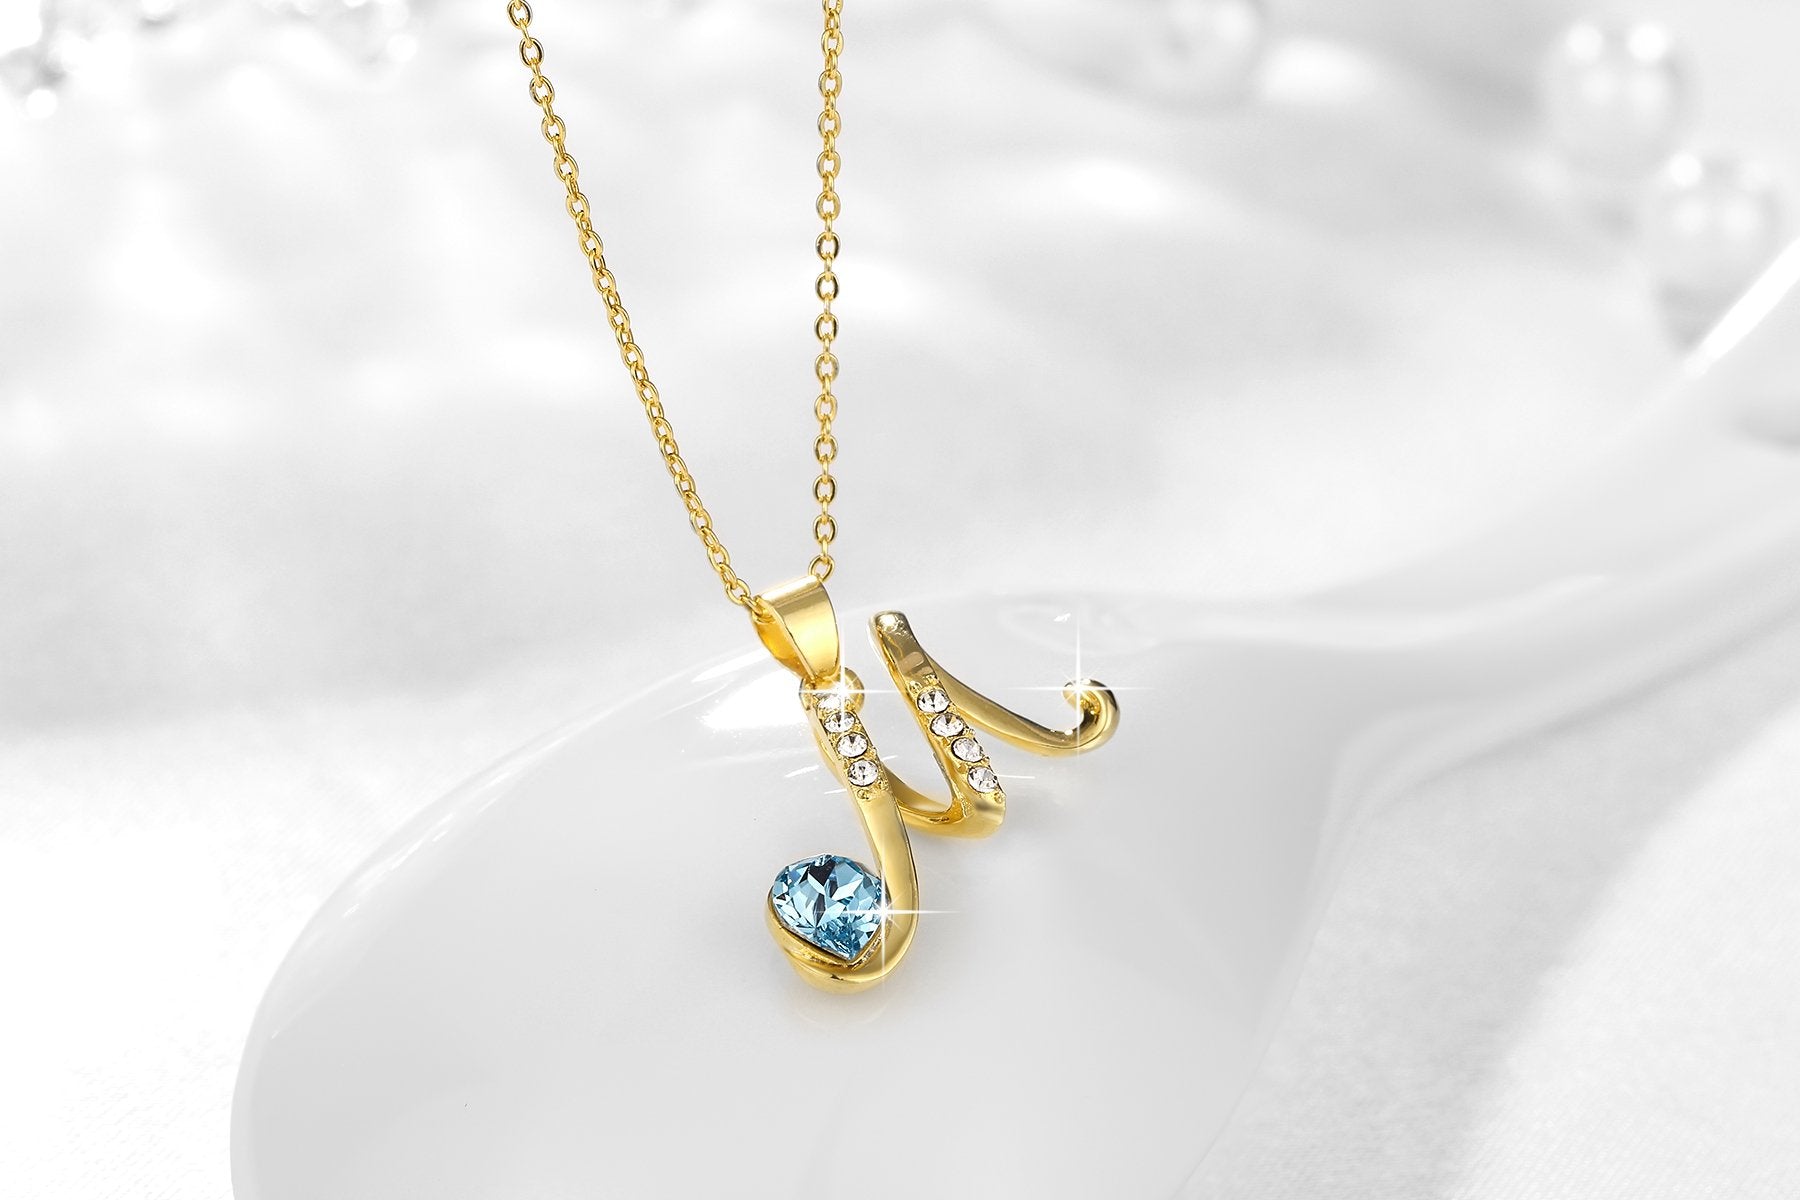 Chunky Chain And Swarovski Crystal Necklace By Heiter |  notonthehighstreet.com